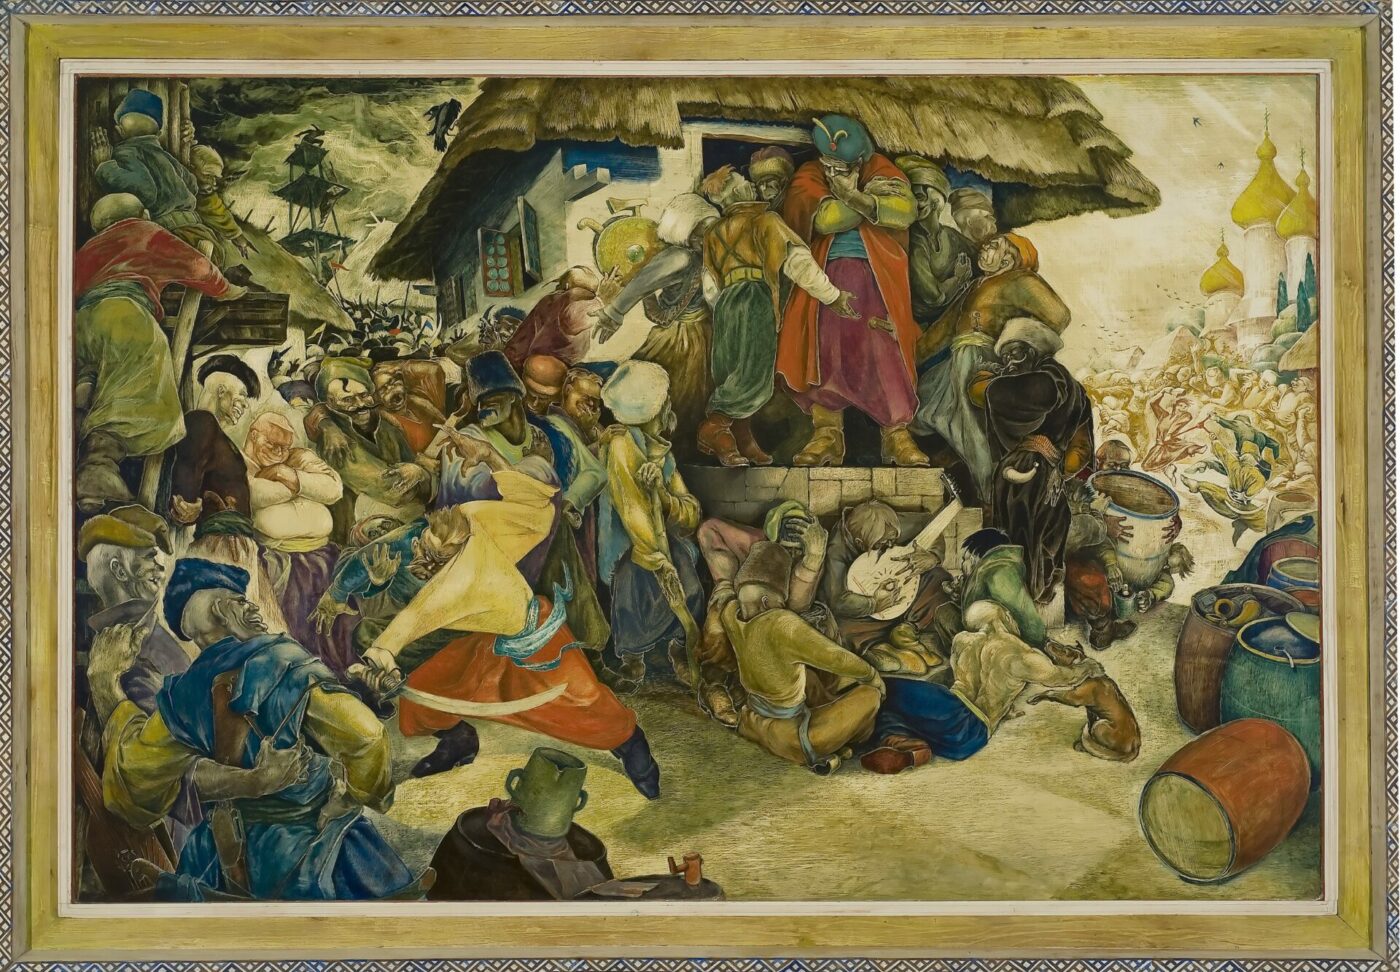 An oil painting of several men fighting, talking, and playing instruments outside of a hut.